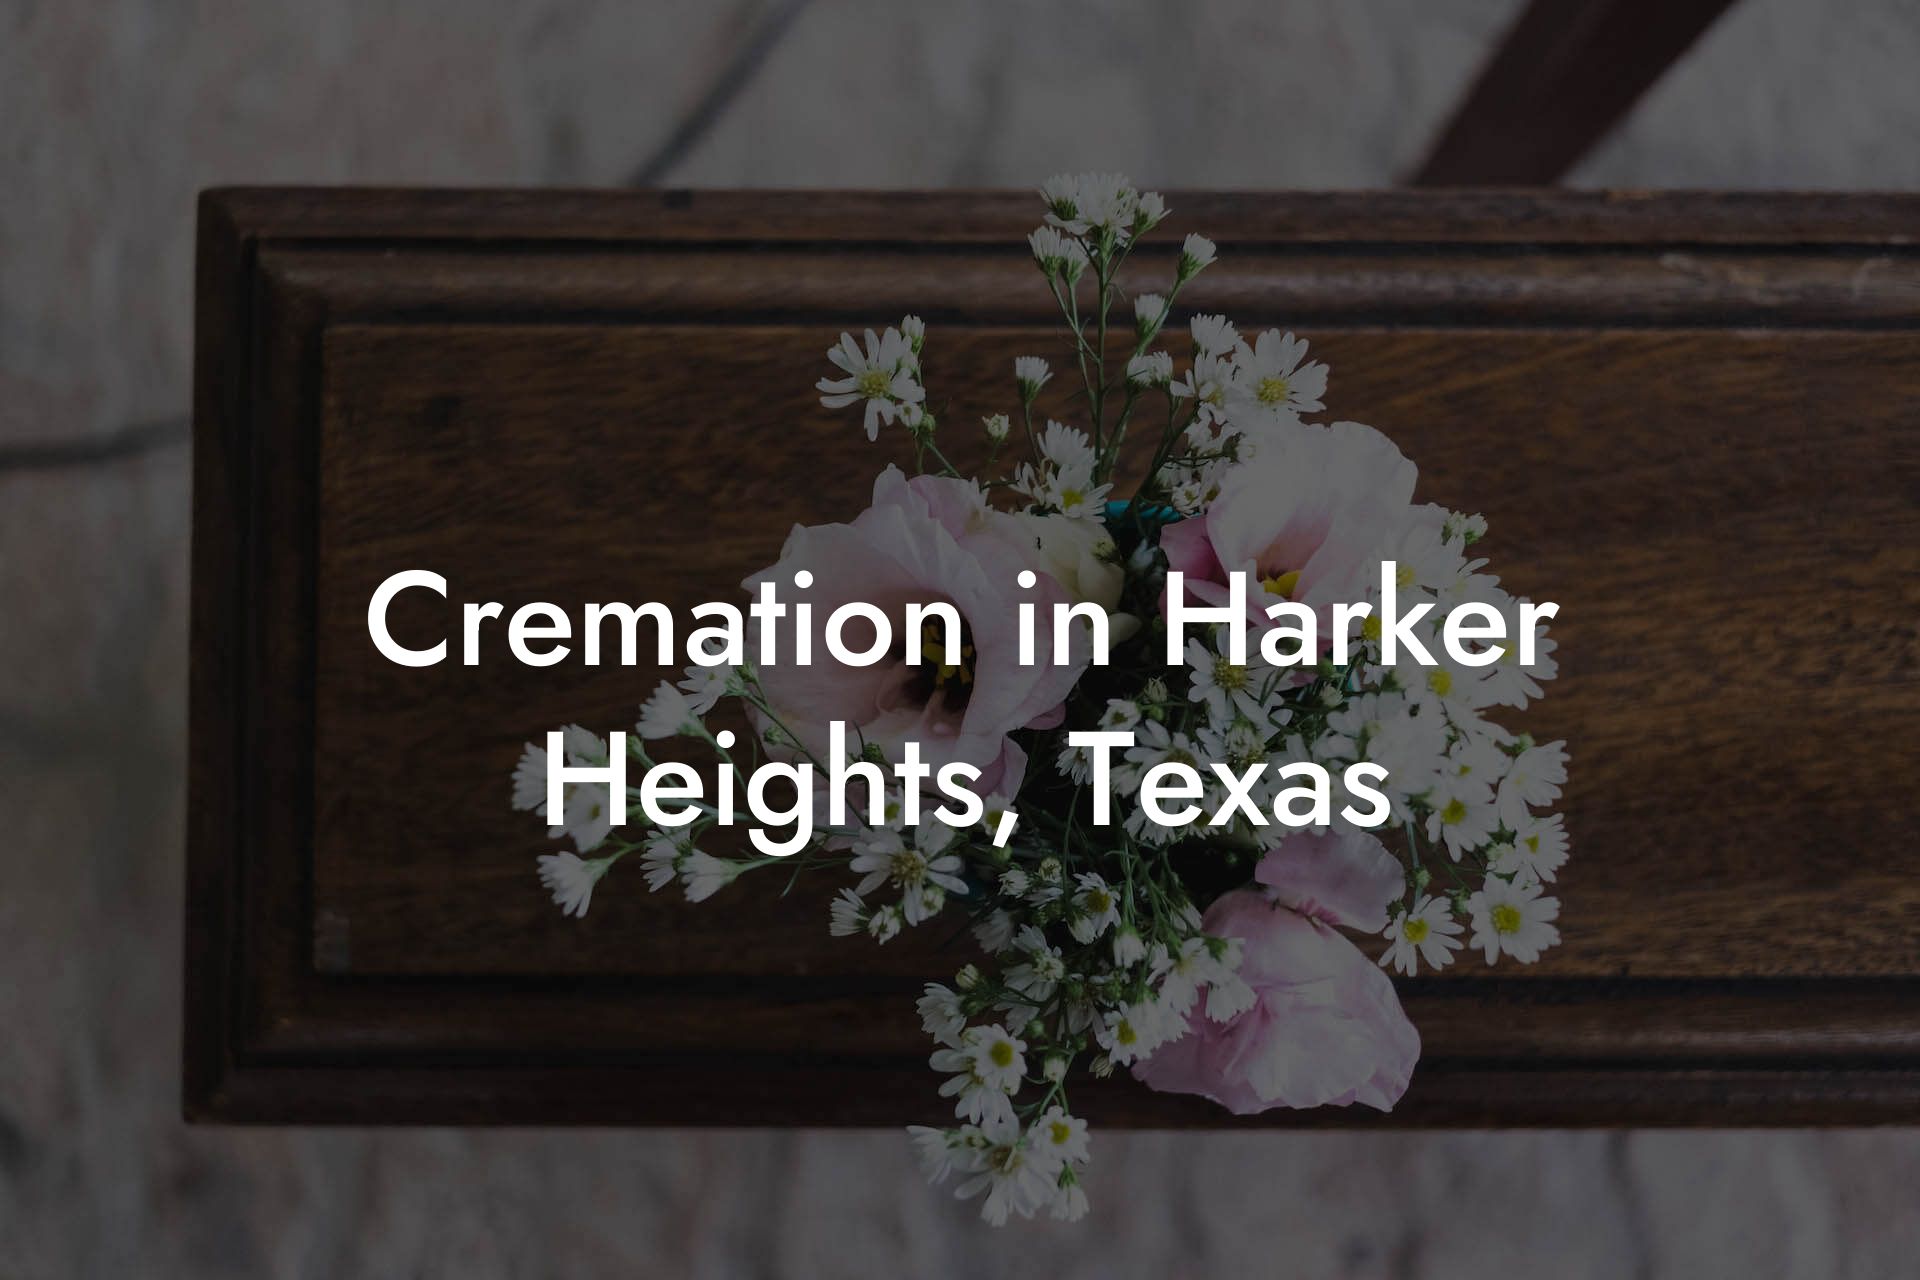 Cremation in Harker Heights, Texas